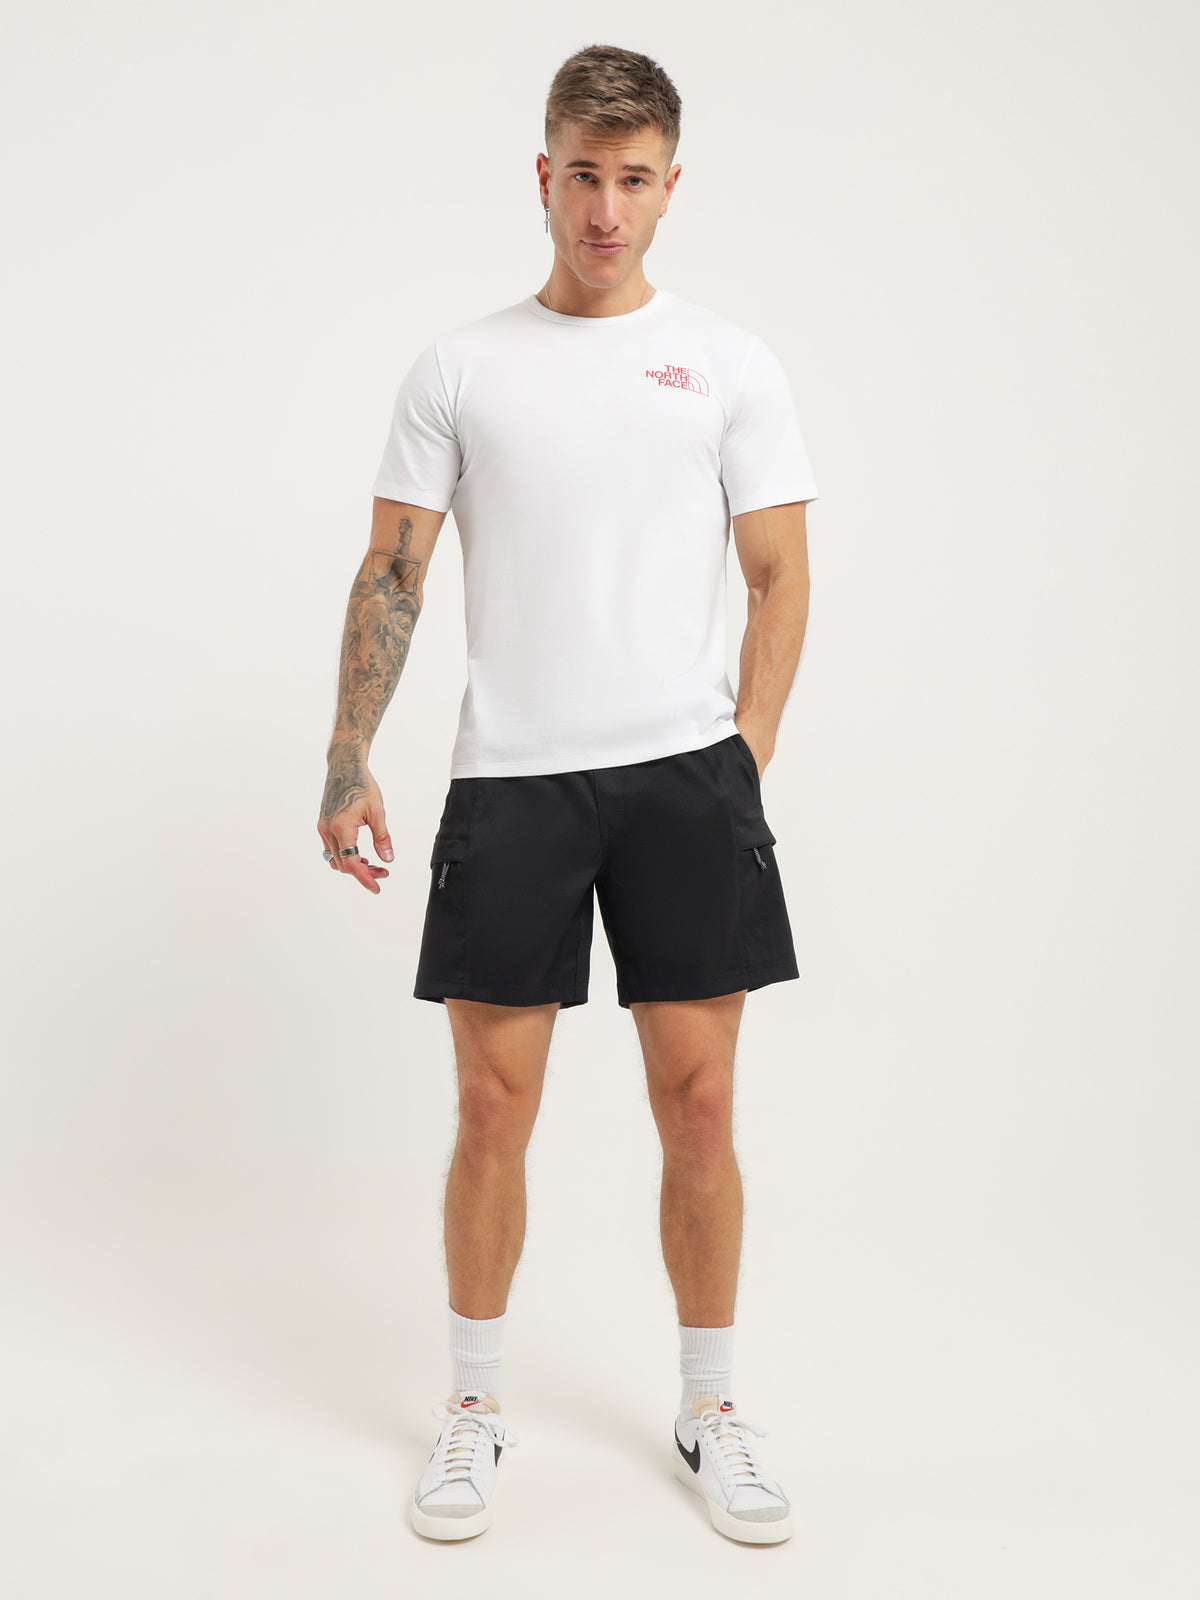 Short Sleeve Trail Recycled T-Shirt in White